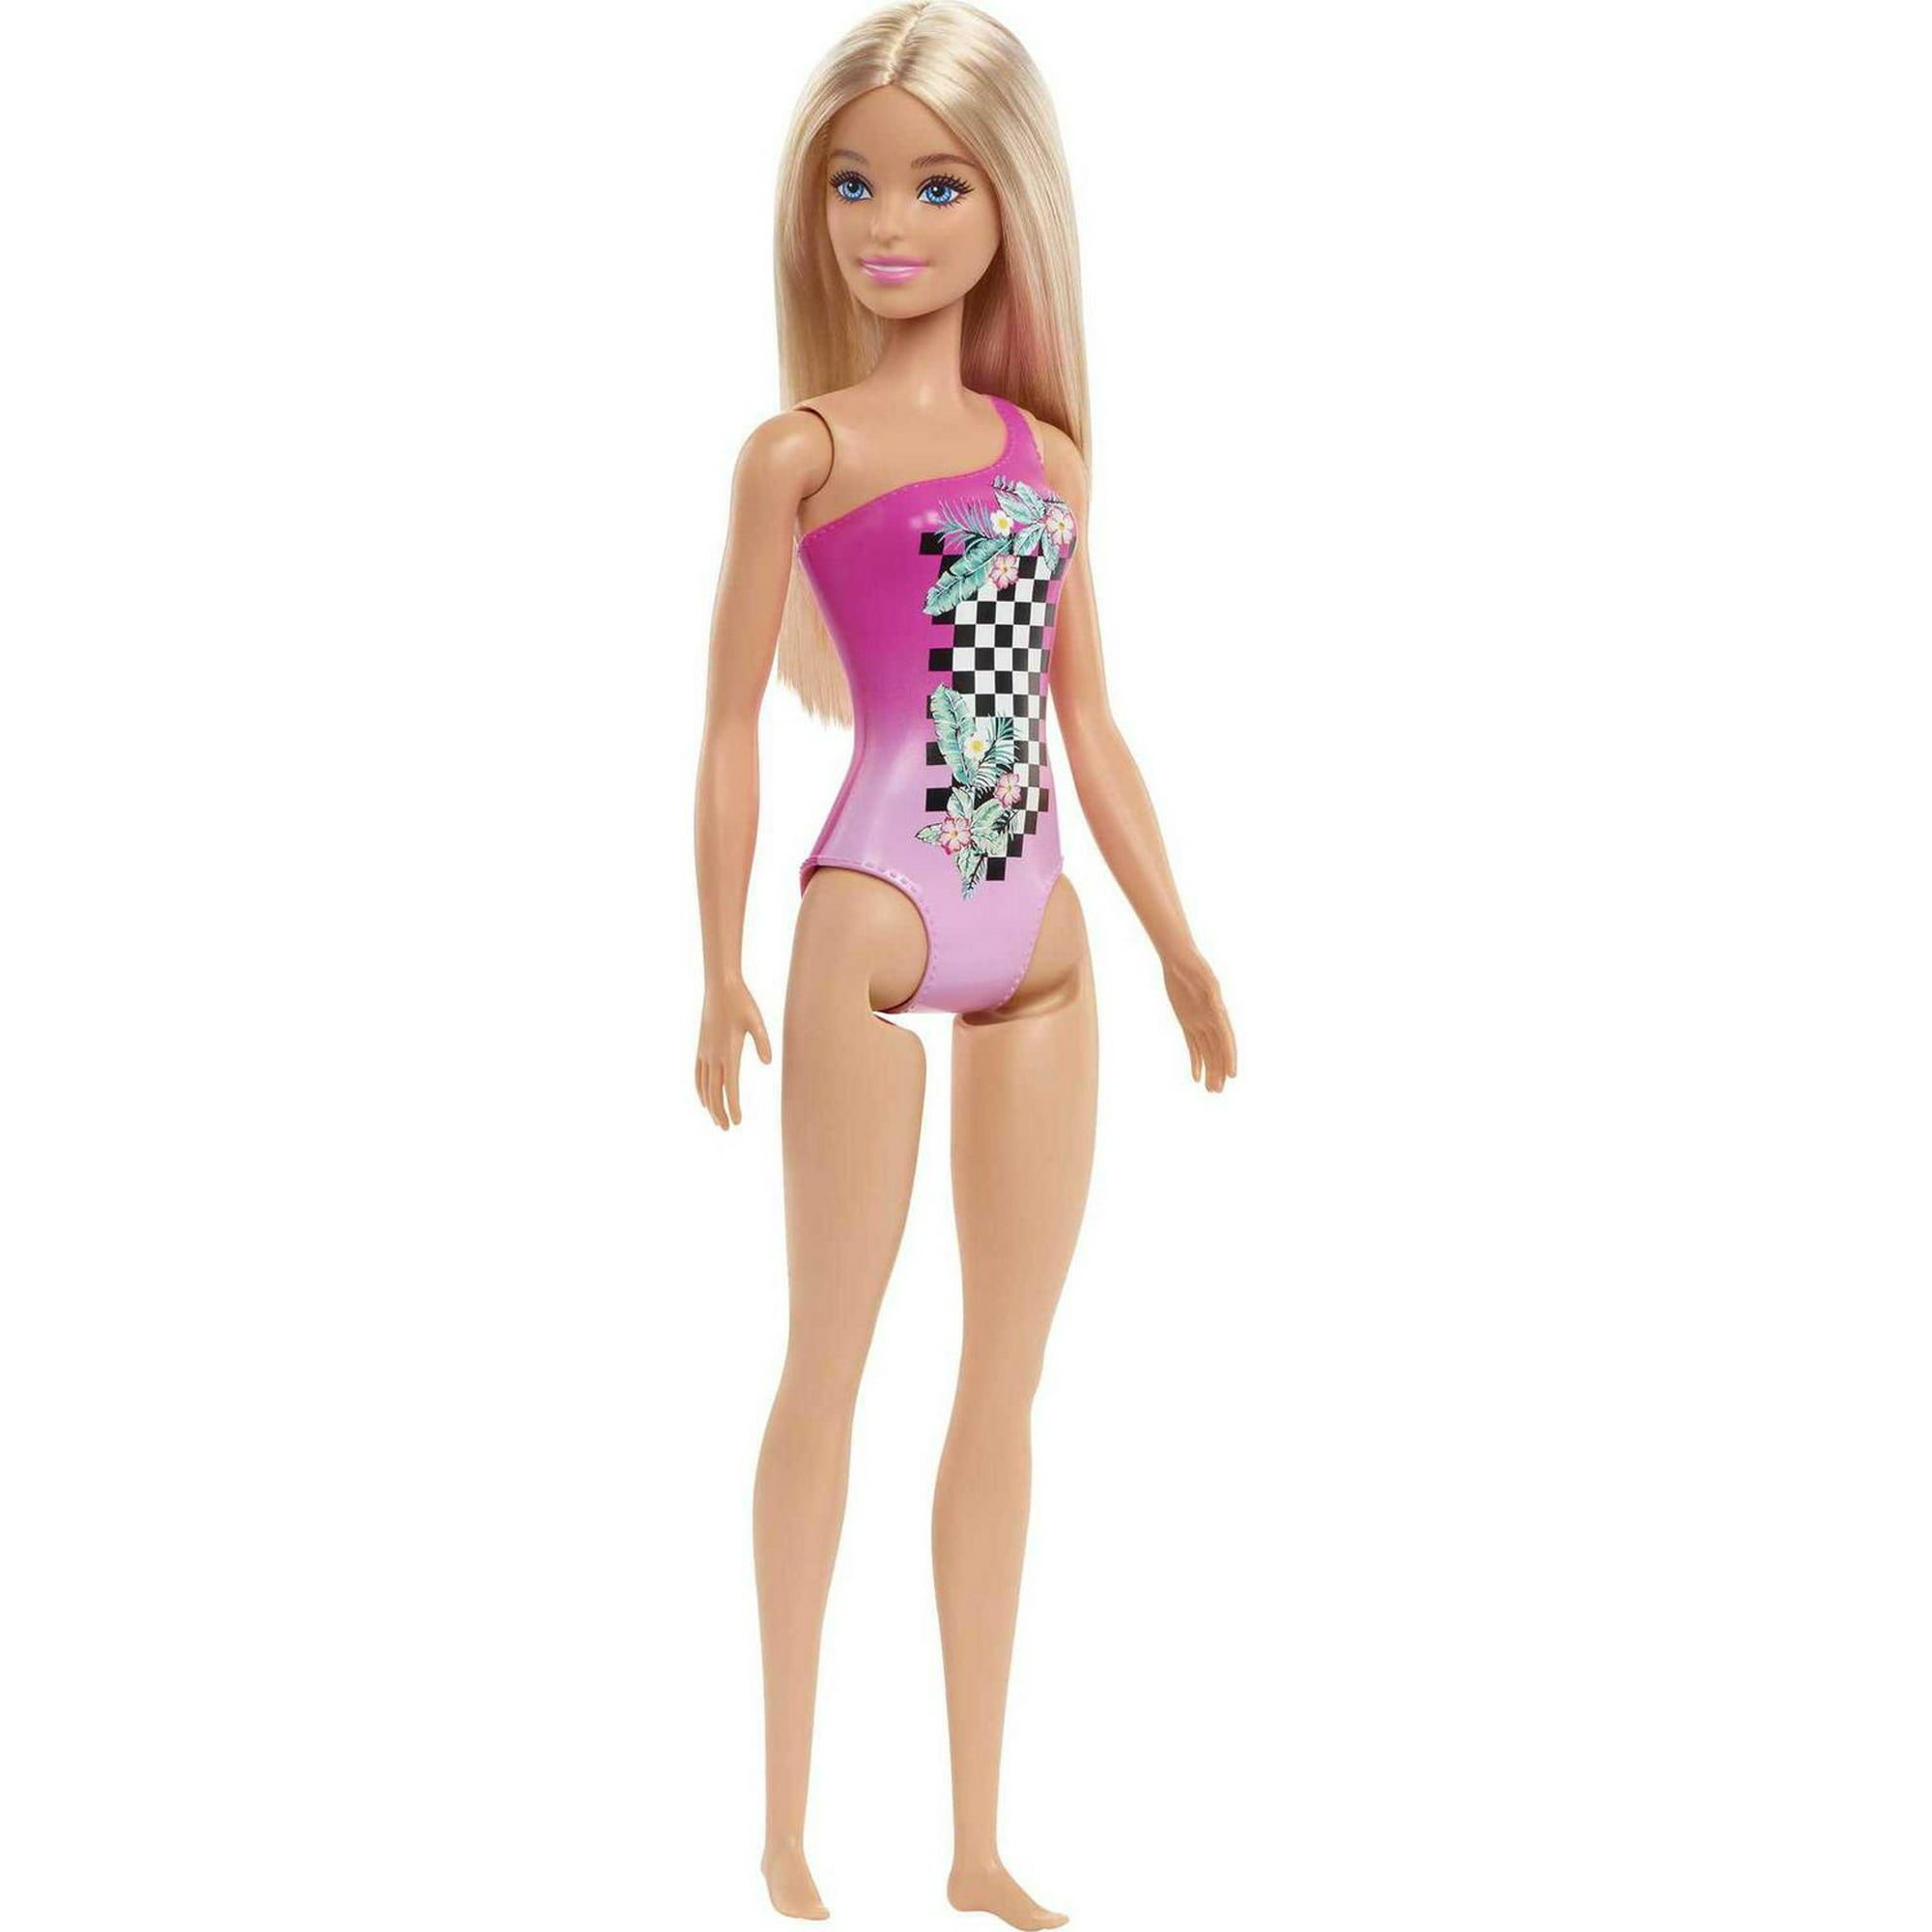 Barbie Dolls Wearing Swimsuits (Sustainable Materials) - Tropical Checkers,  for Kids 3 to 7 Years Old 